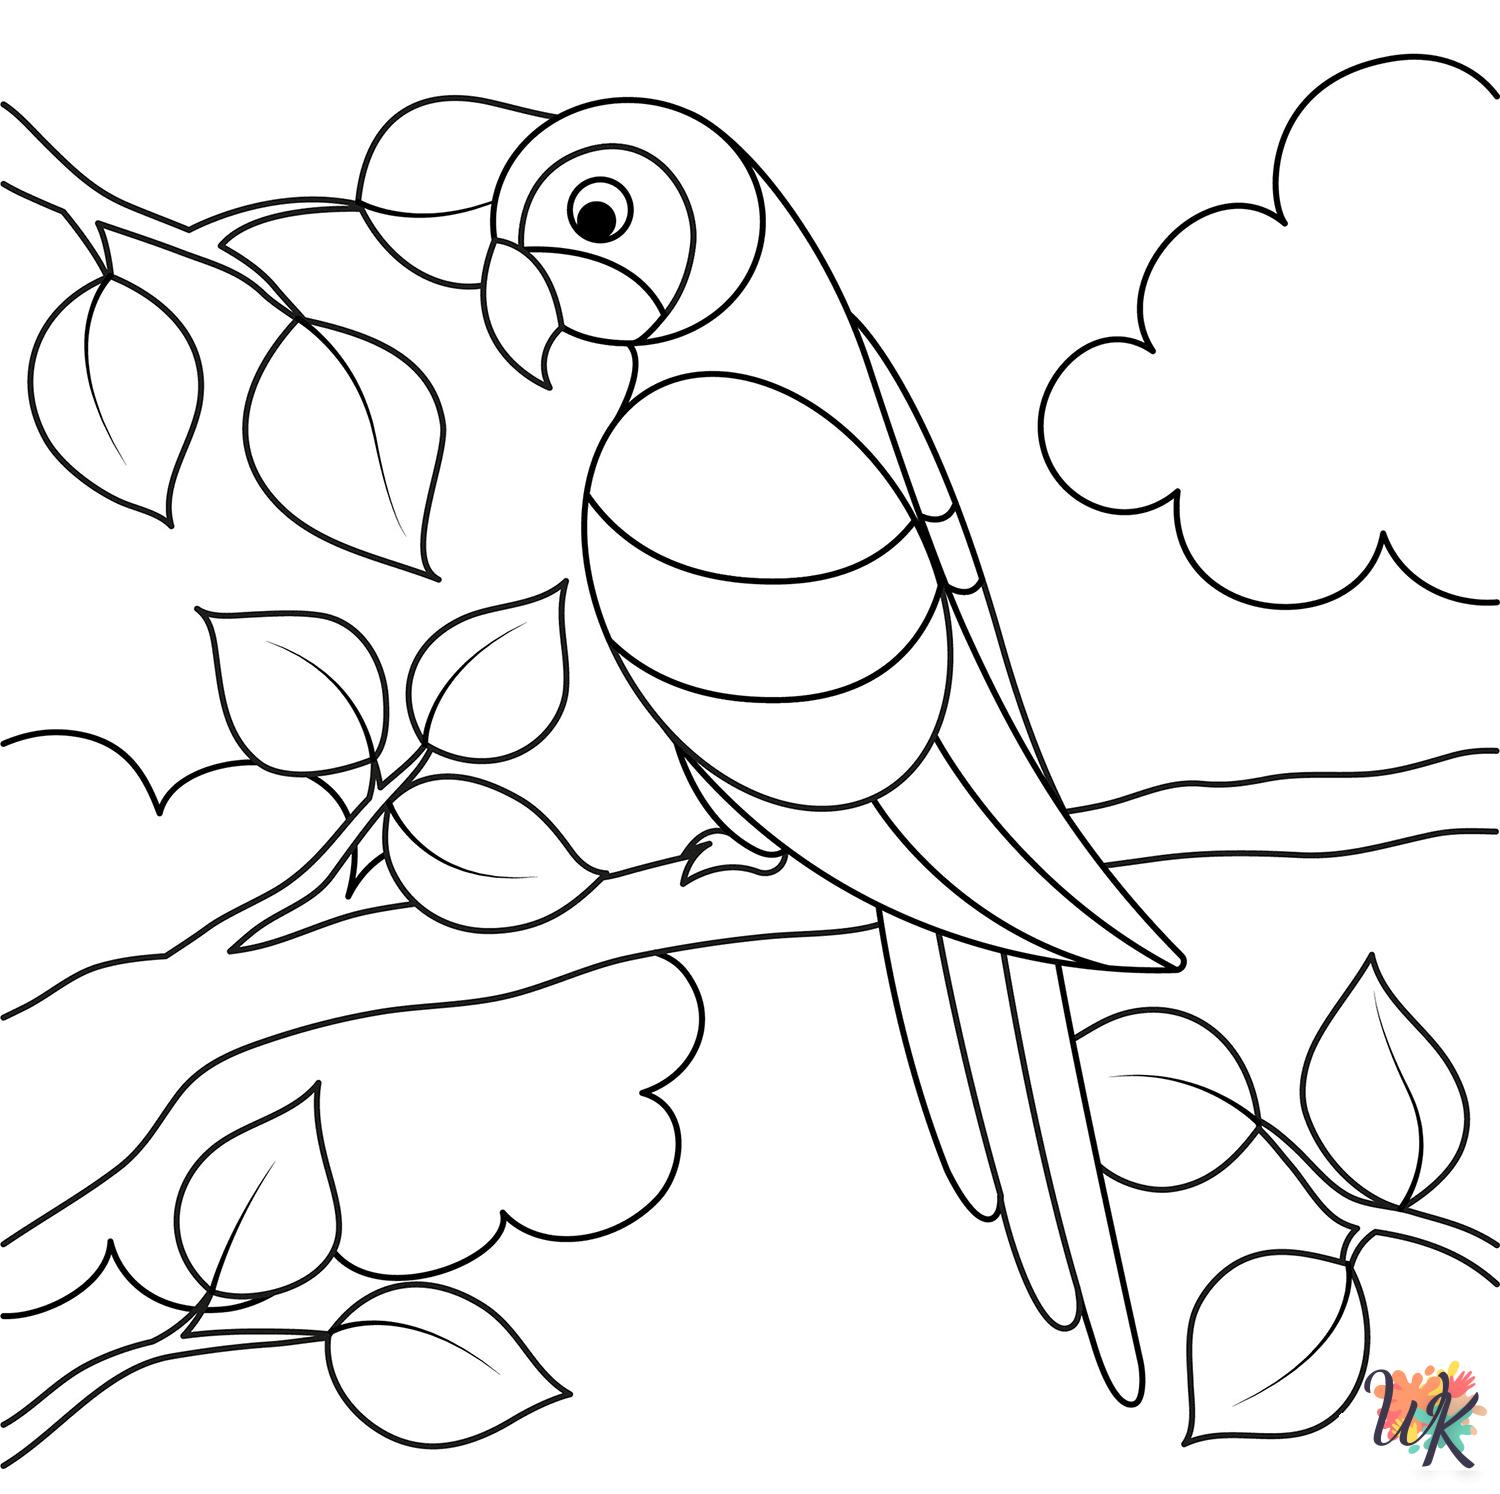 Parrot coloring pages for adults easy